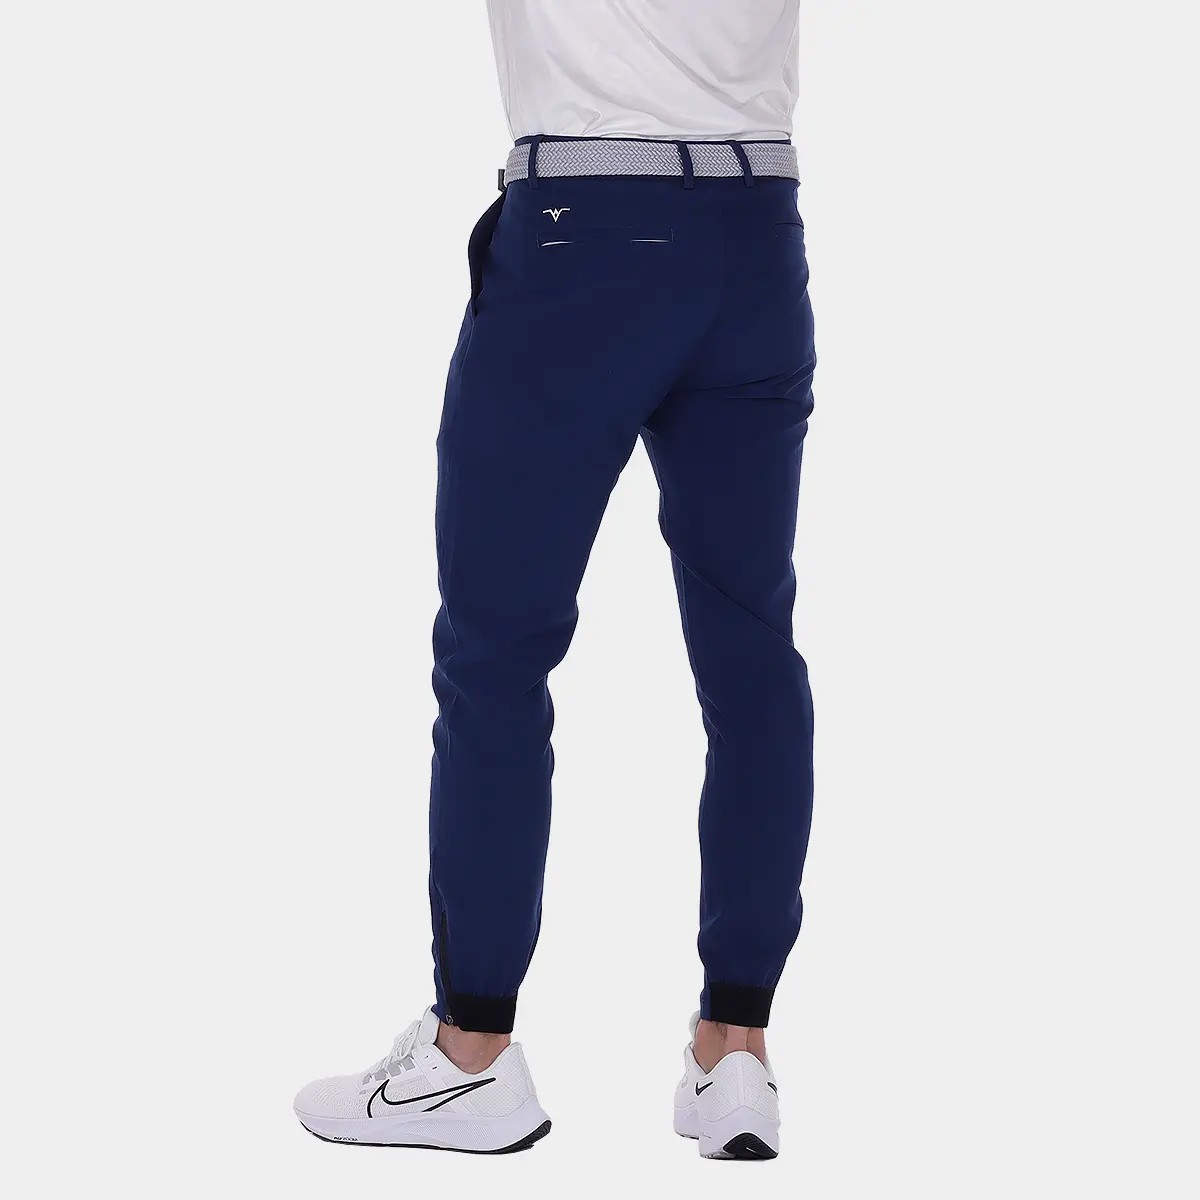 Shop Navy Blue Golf Joggers with Belt Loops